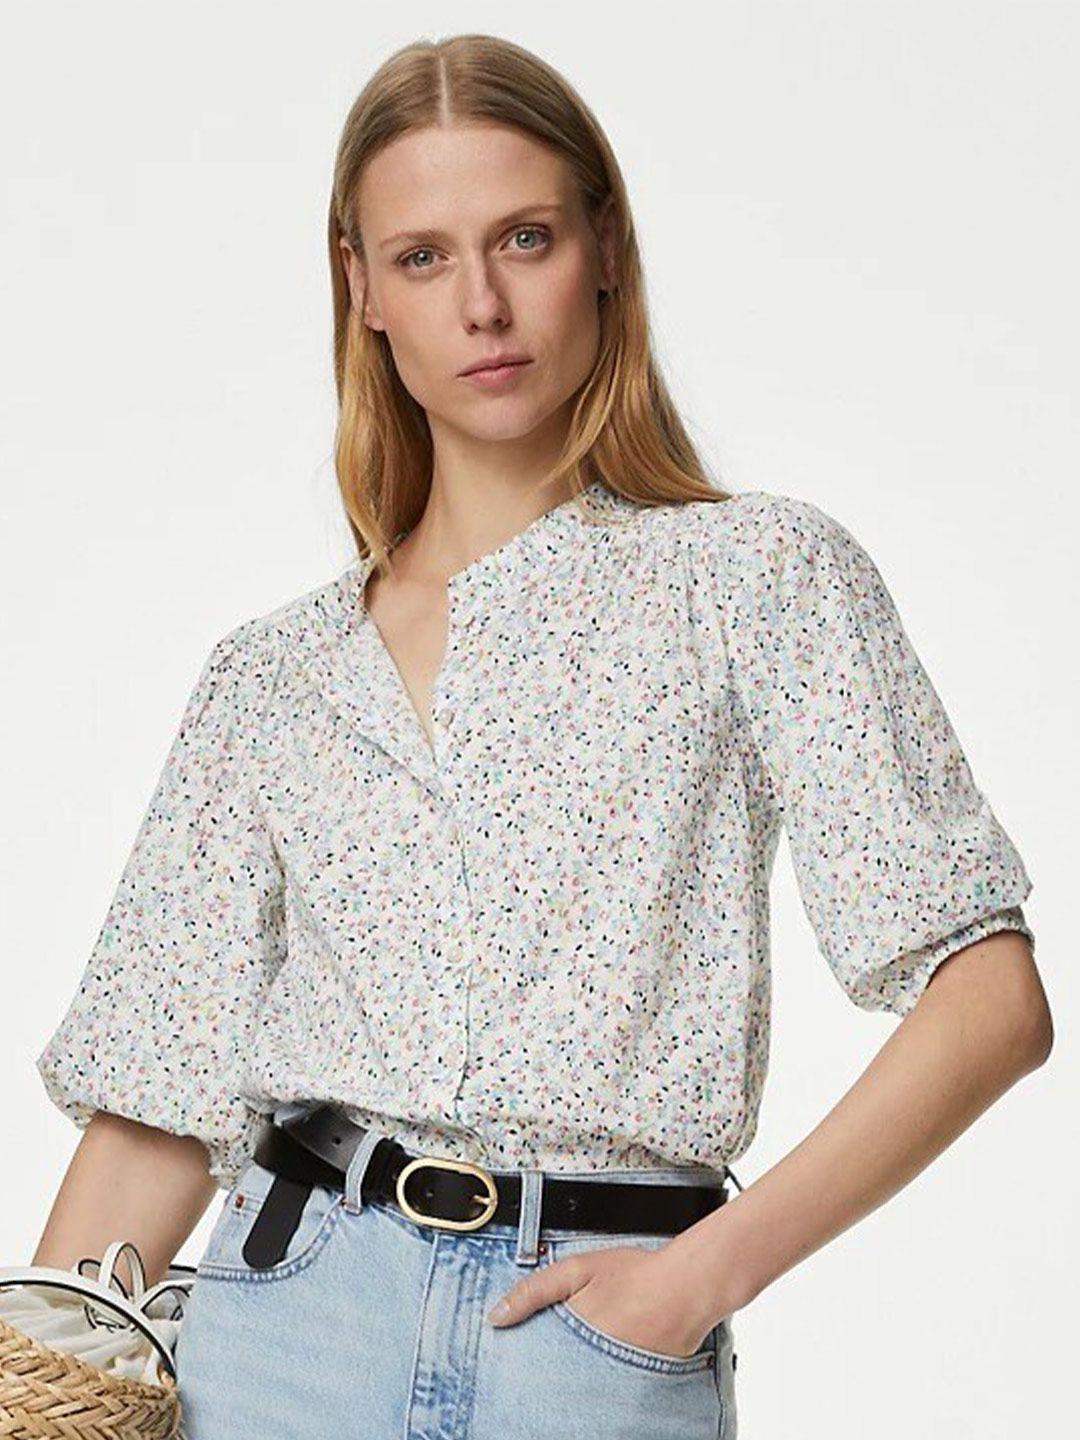 marks & spencer floral printed puff sleeve pure cotton shirt style top